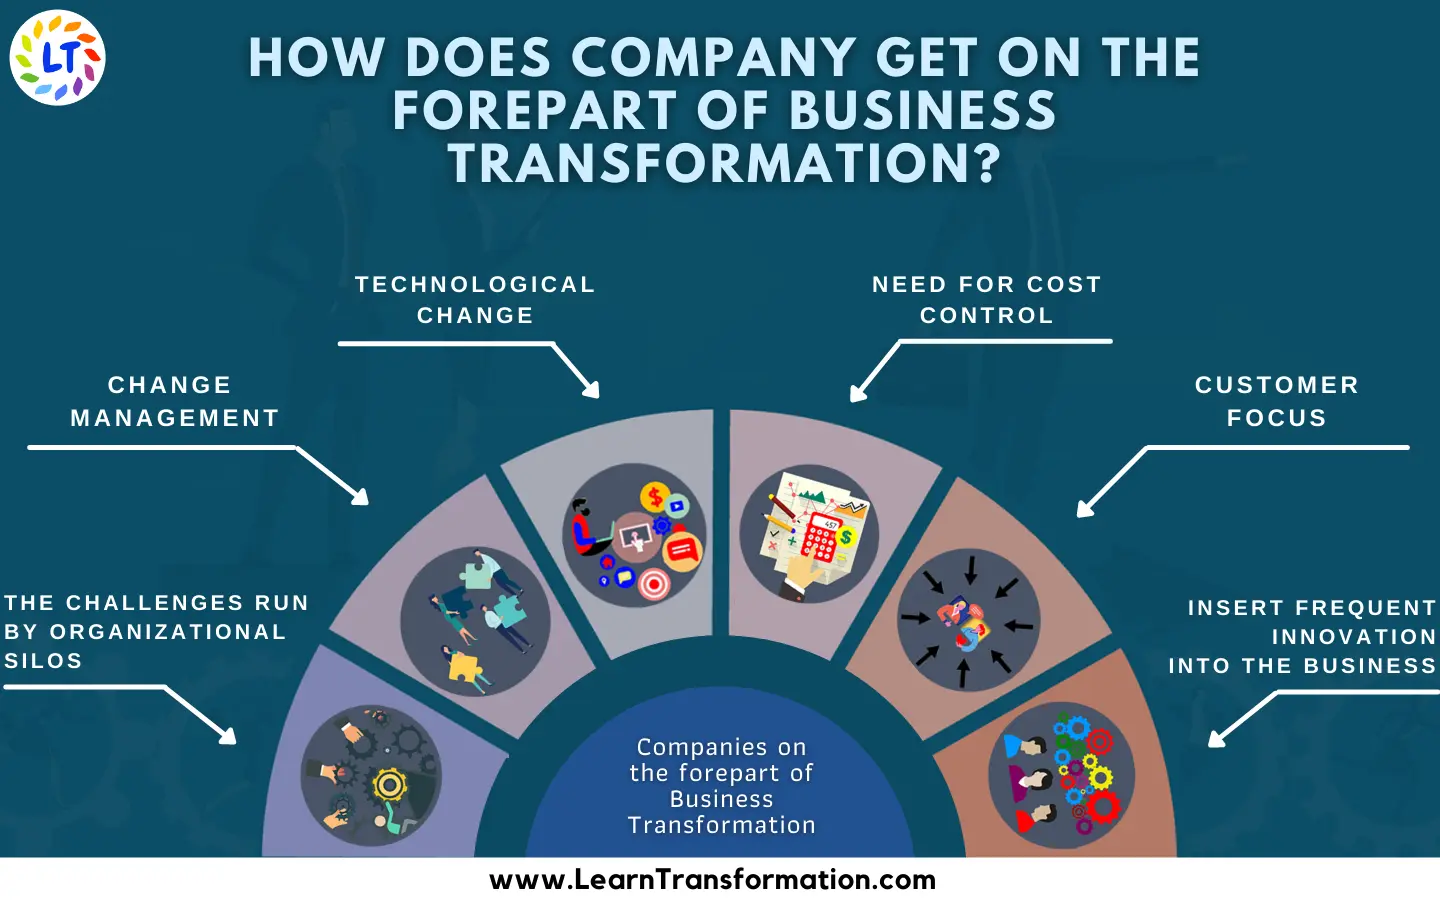 High Tech Solutions to Drive Business Transformation through Technology